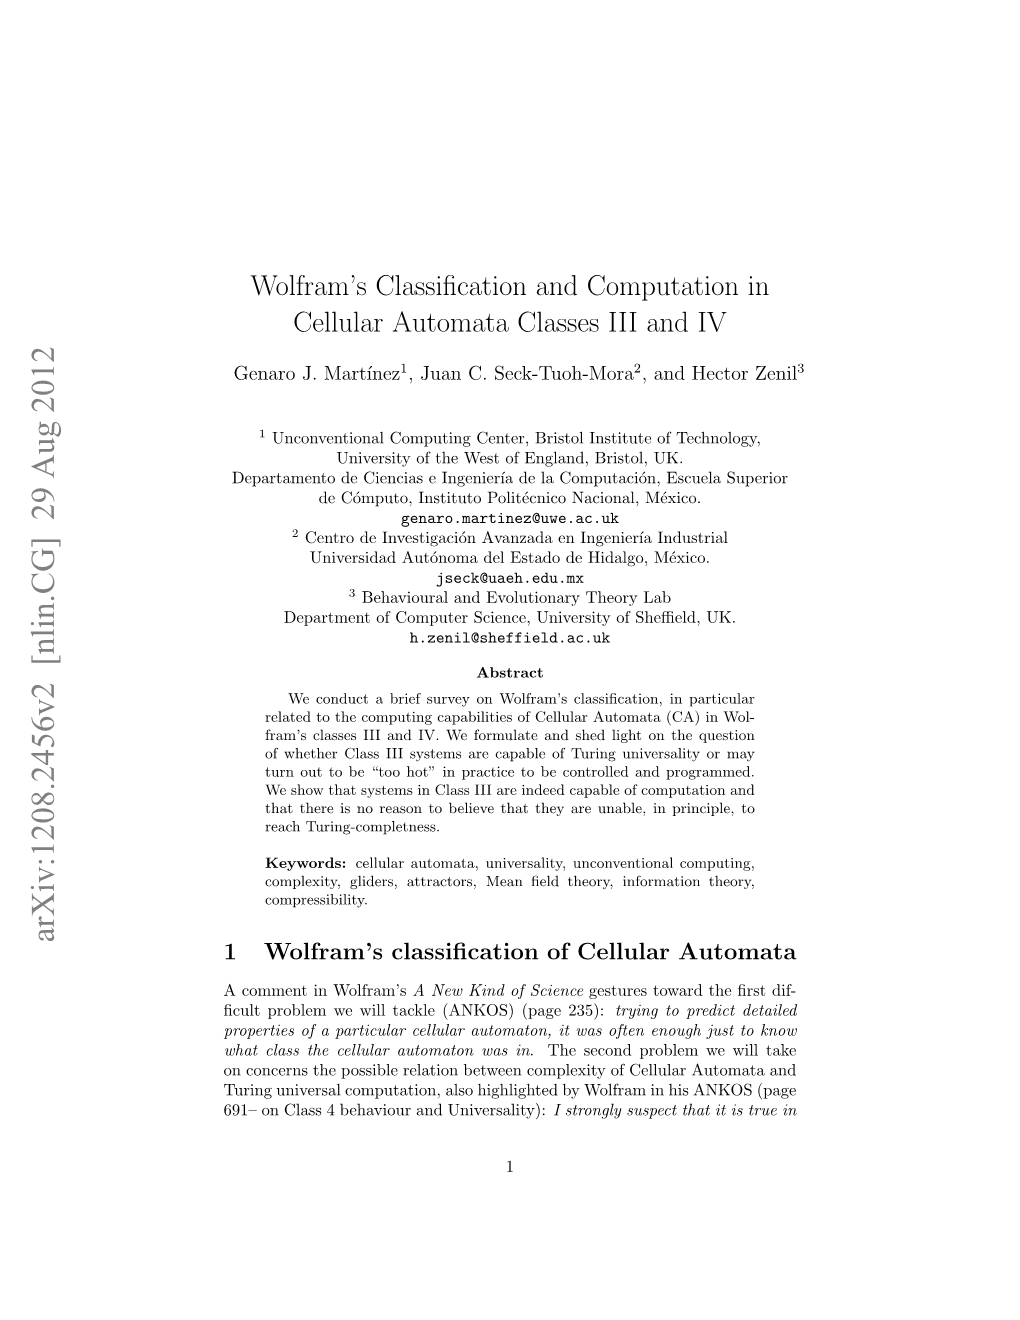 Wolfram's Classification and Computation in Cellular Automata